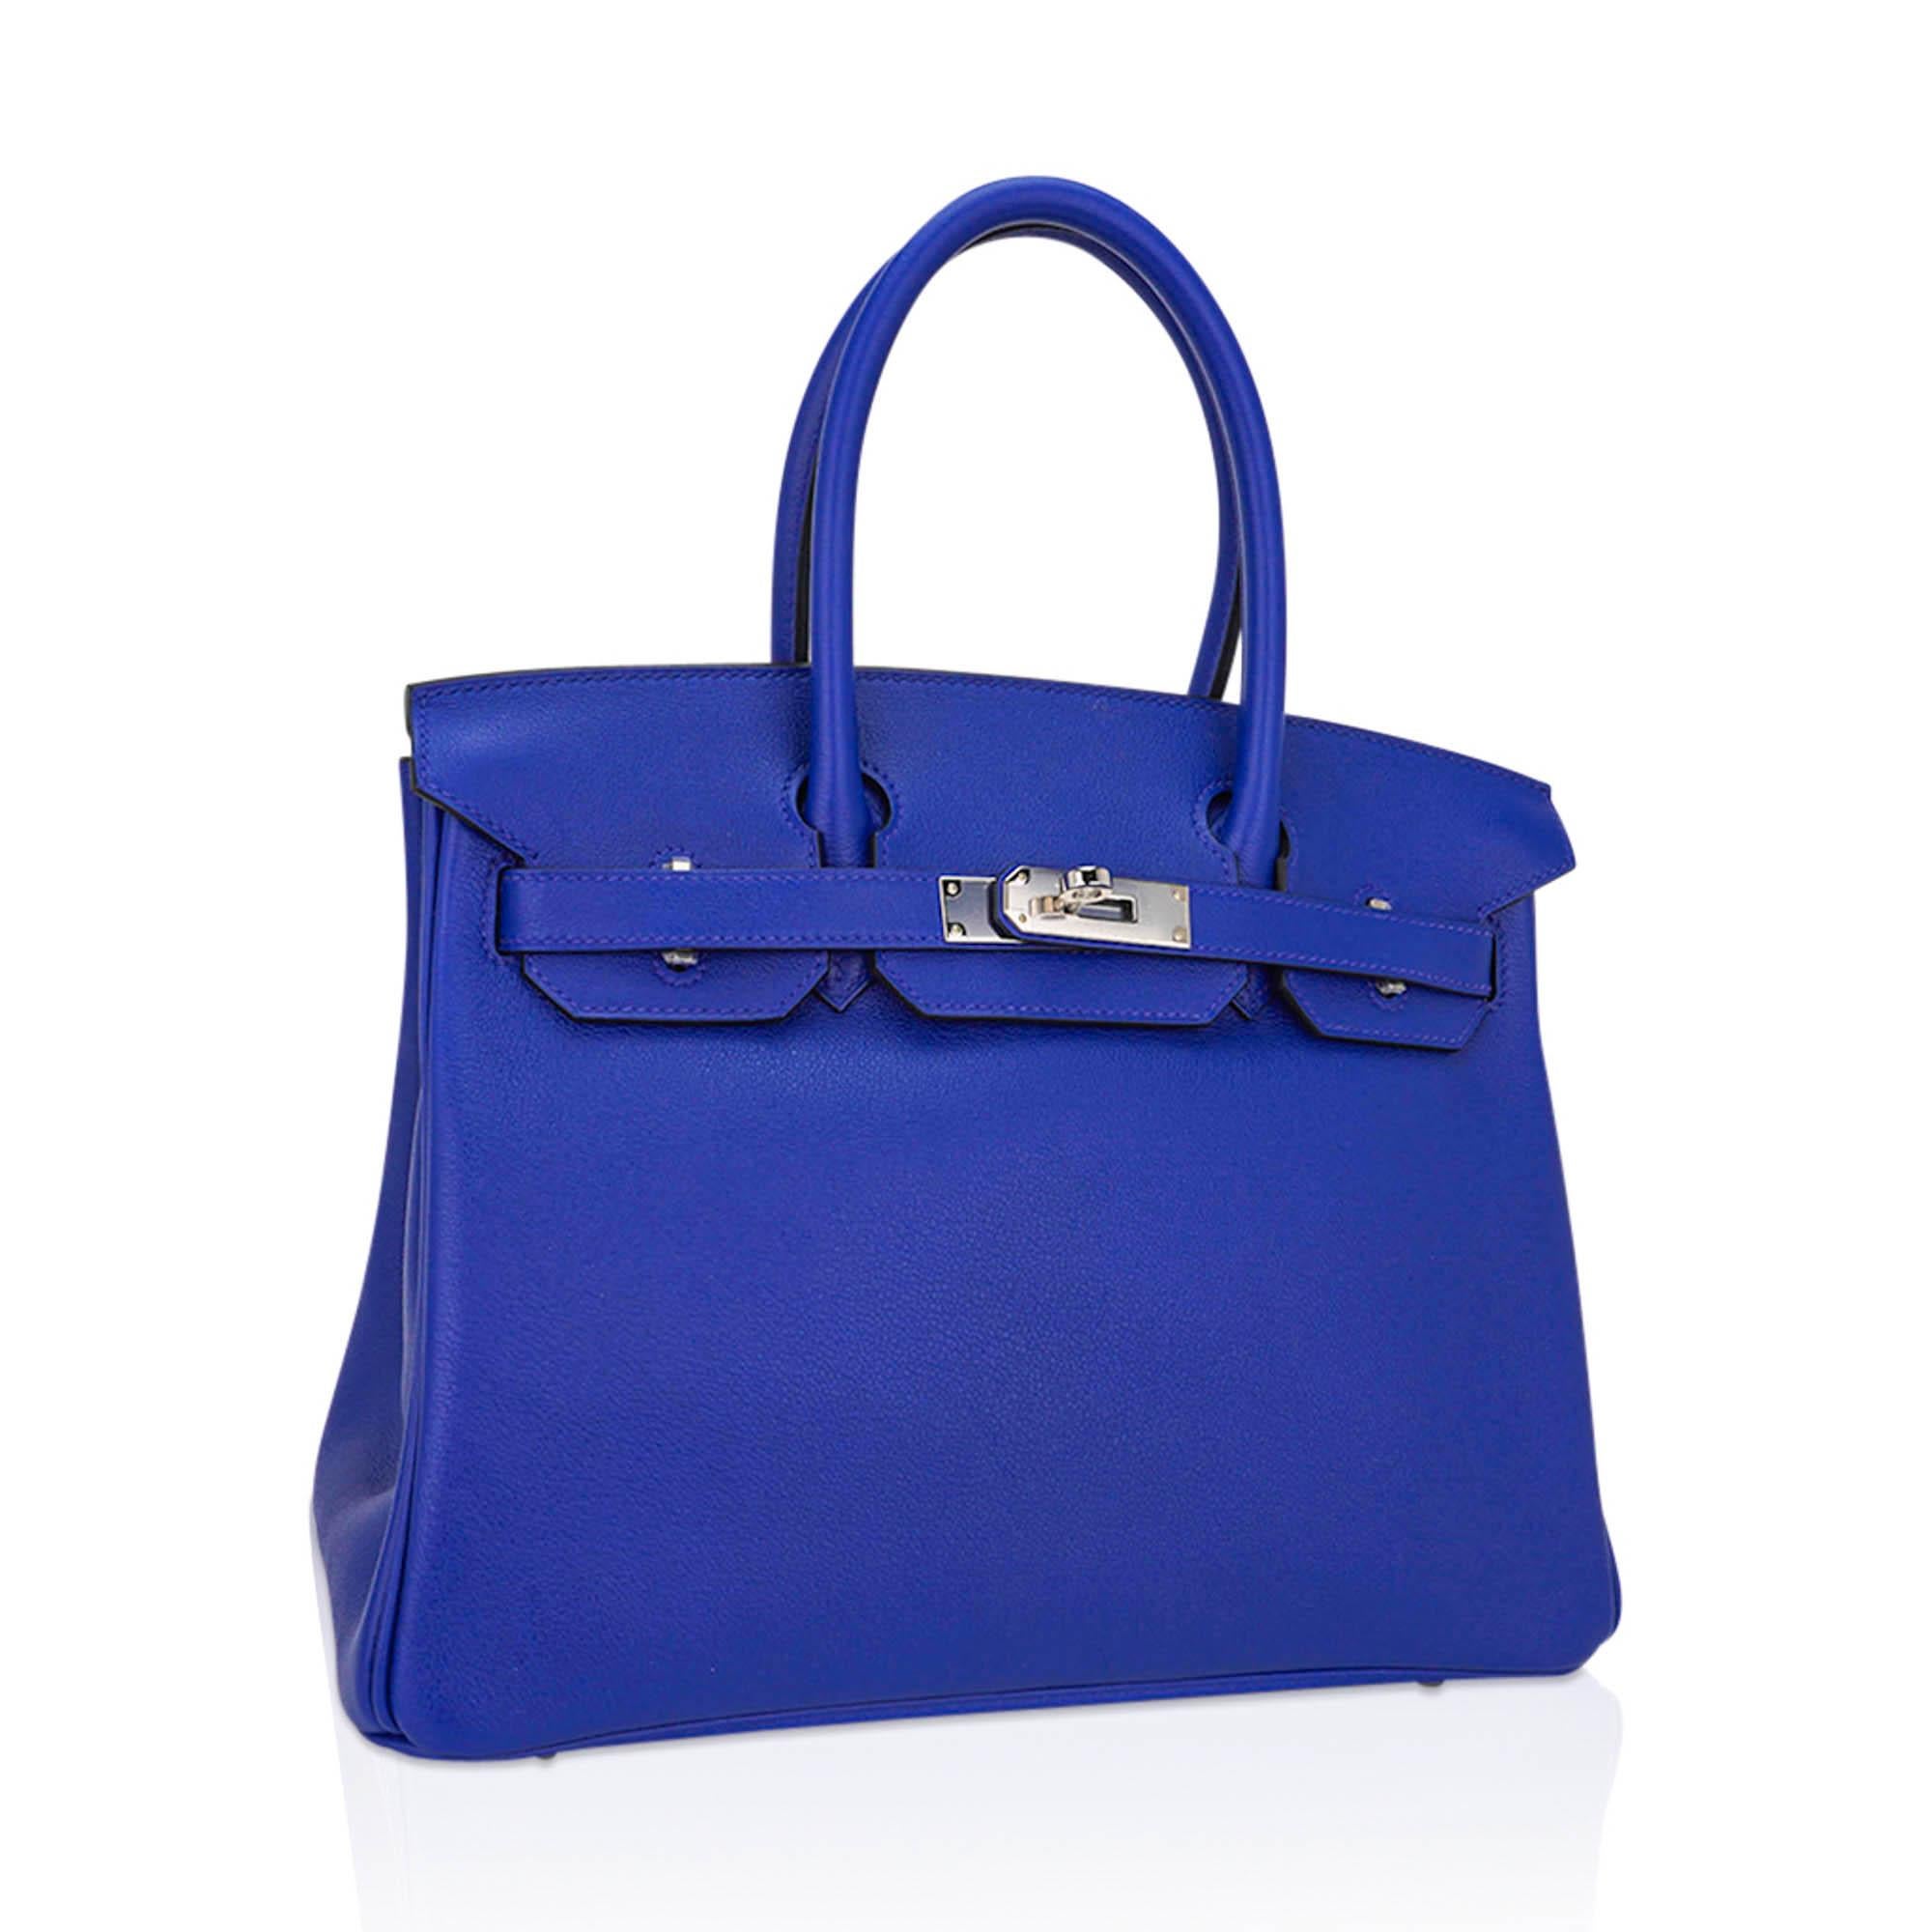 Mightychic offers an Hermes Birkin 30 bag featured in vivid Blue Electric.
This brilliant Bleu Electrique Birkin bag in supple Novillo leather is exquisitely accented with crisp palladium hardware.
Comes with the lock and keys in the clochette,